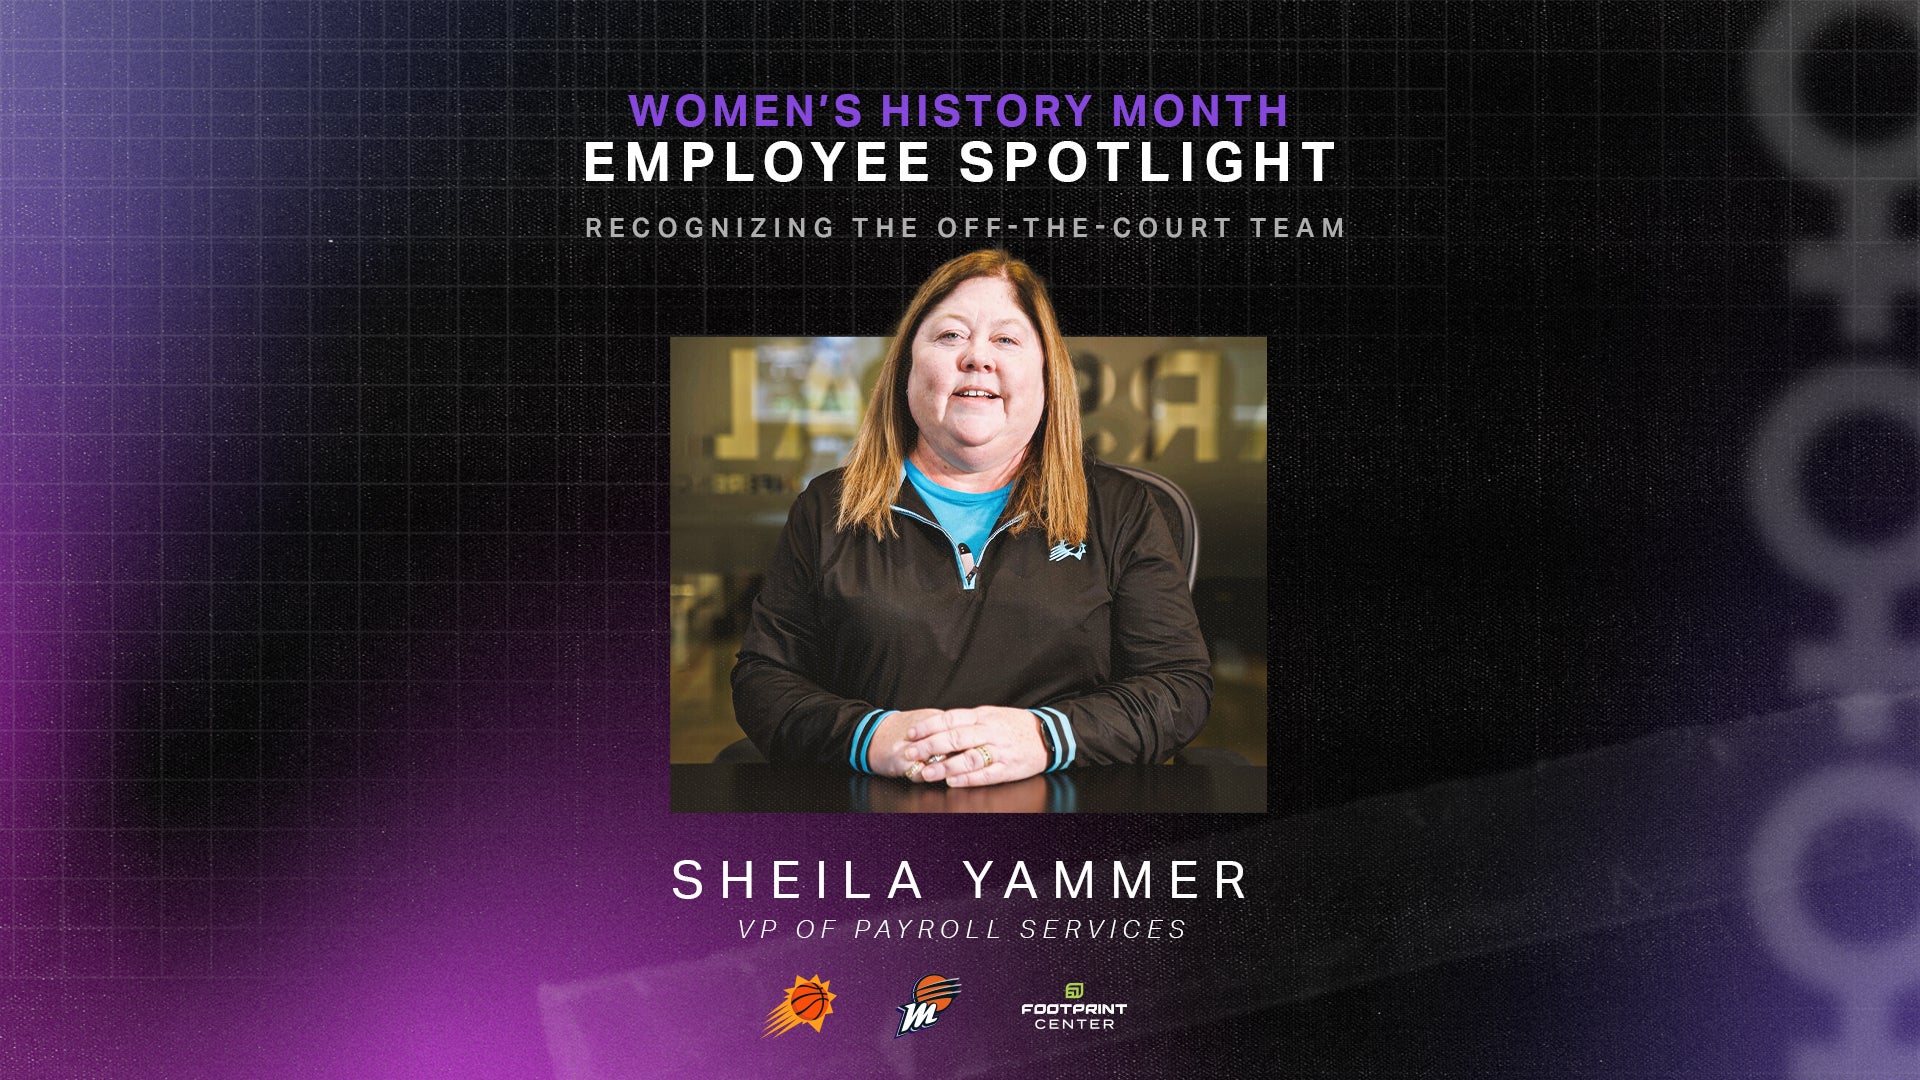 EMPLOYEE SPOTLIGHT: SHEILA YAMMER, VICE PRESIDENT OF PAYROLL SERVICES 